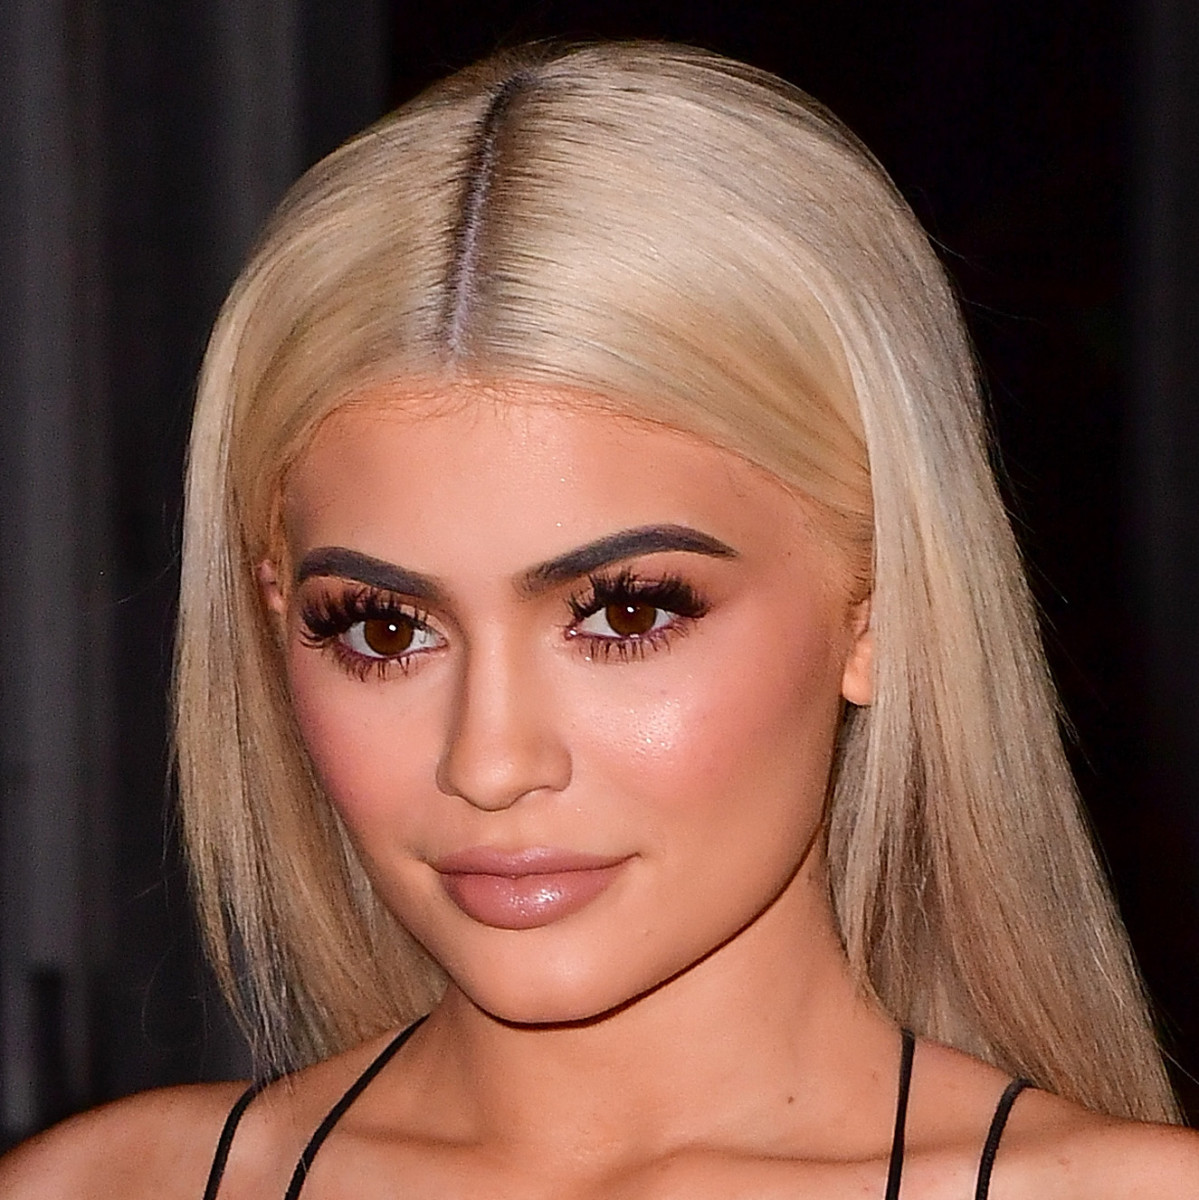 Kylie Jenner Wiki 2021 Net Worth, Height, Weight, Relationship & Full